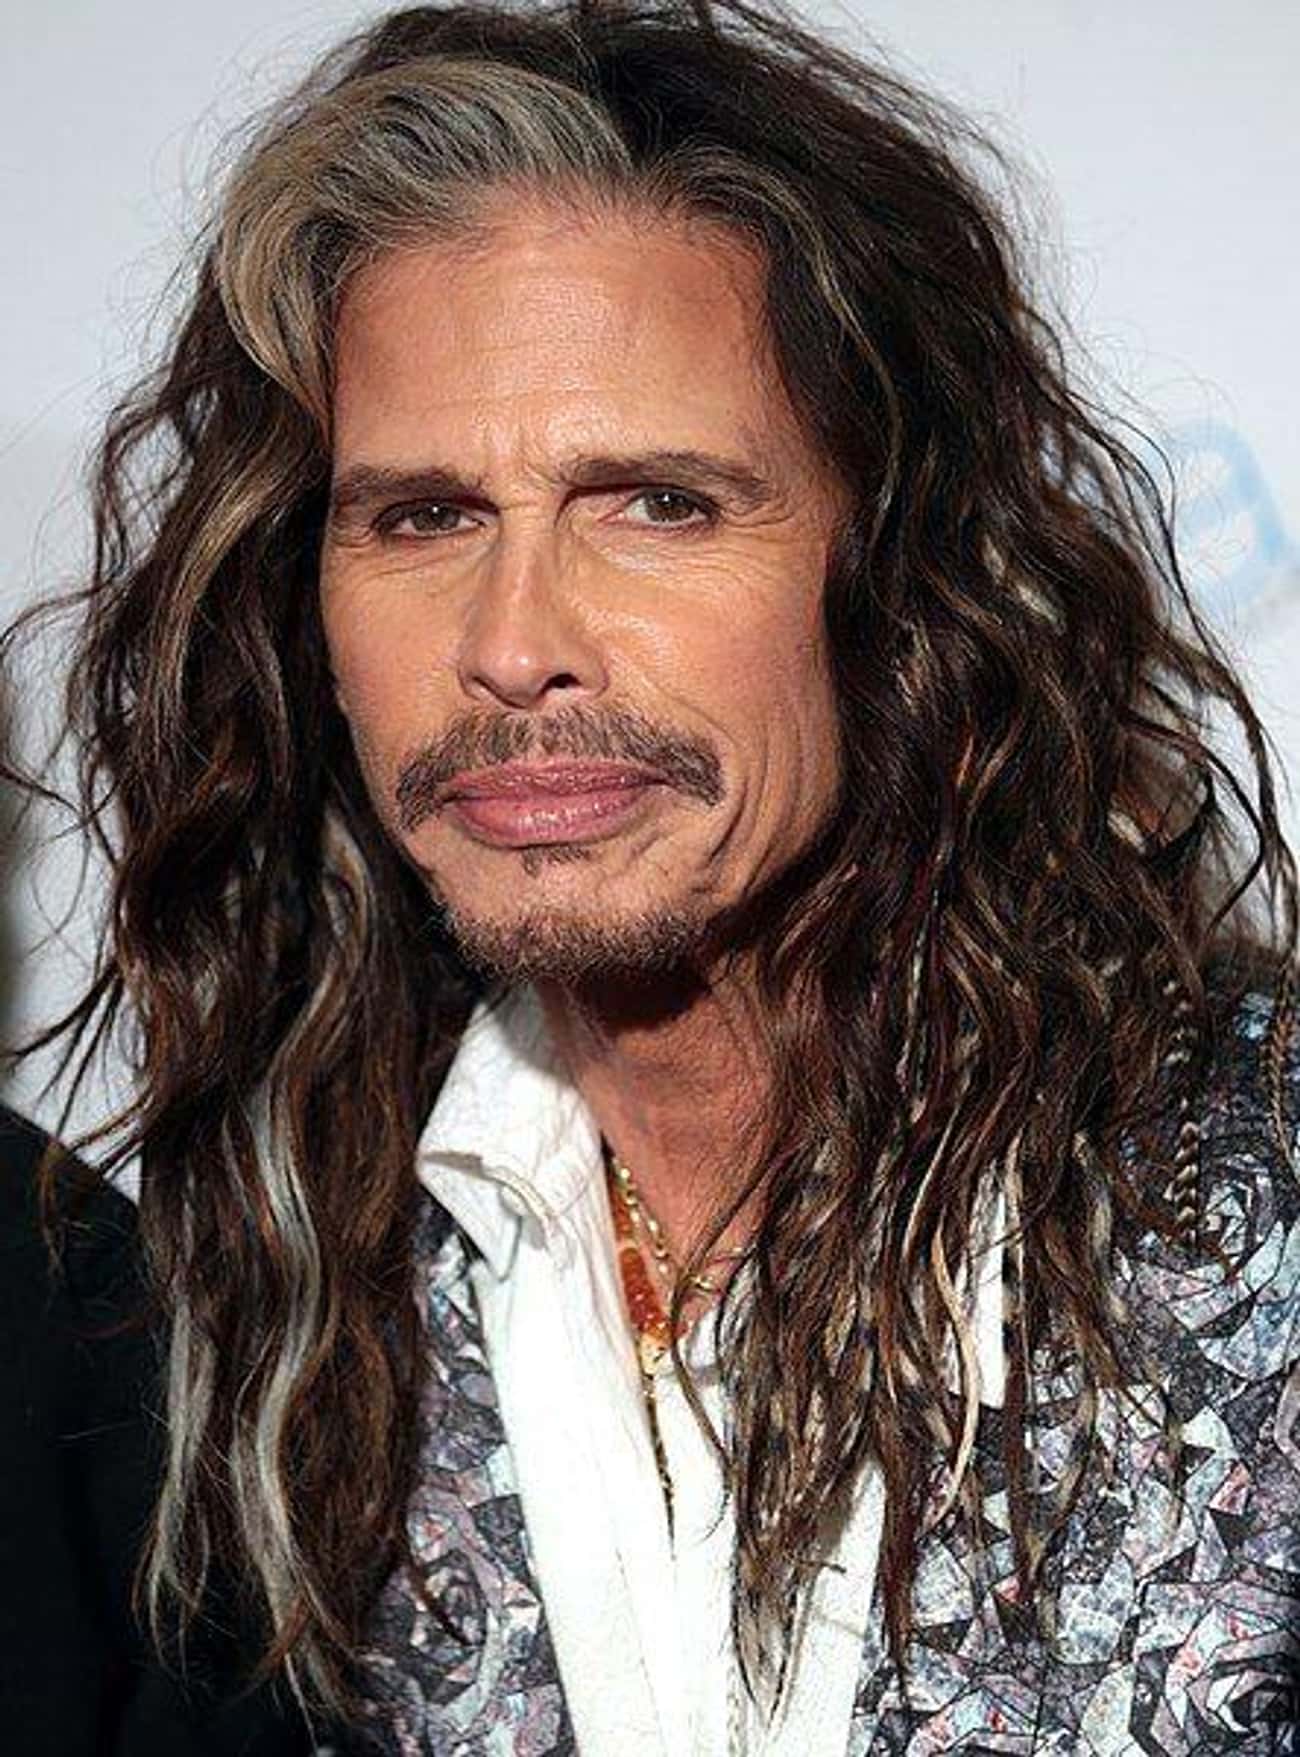 Steven Tyler Admitted He Was In Sexual Relationship With A Teenager, And Even Became Her Legal Guardian